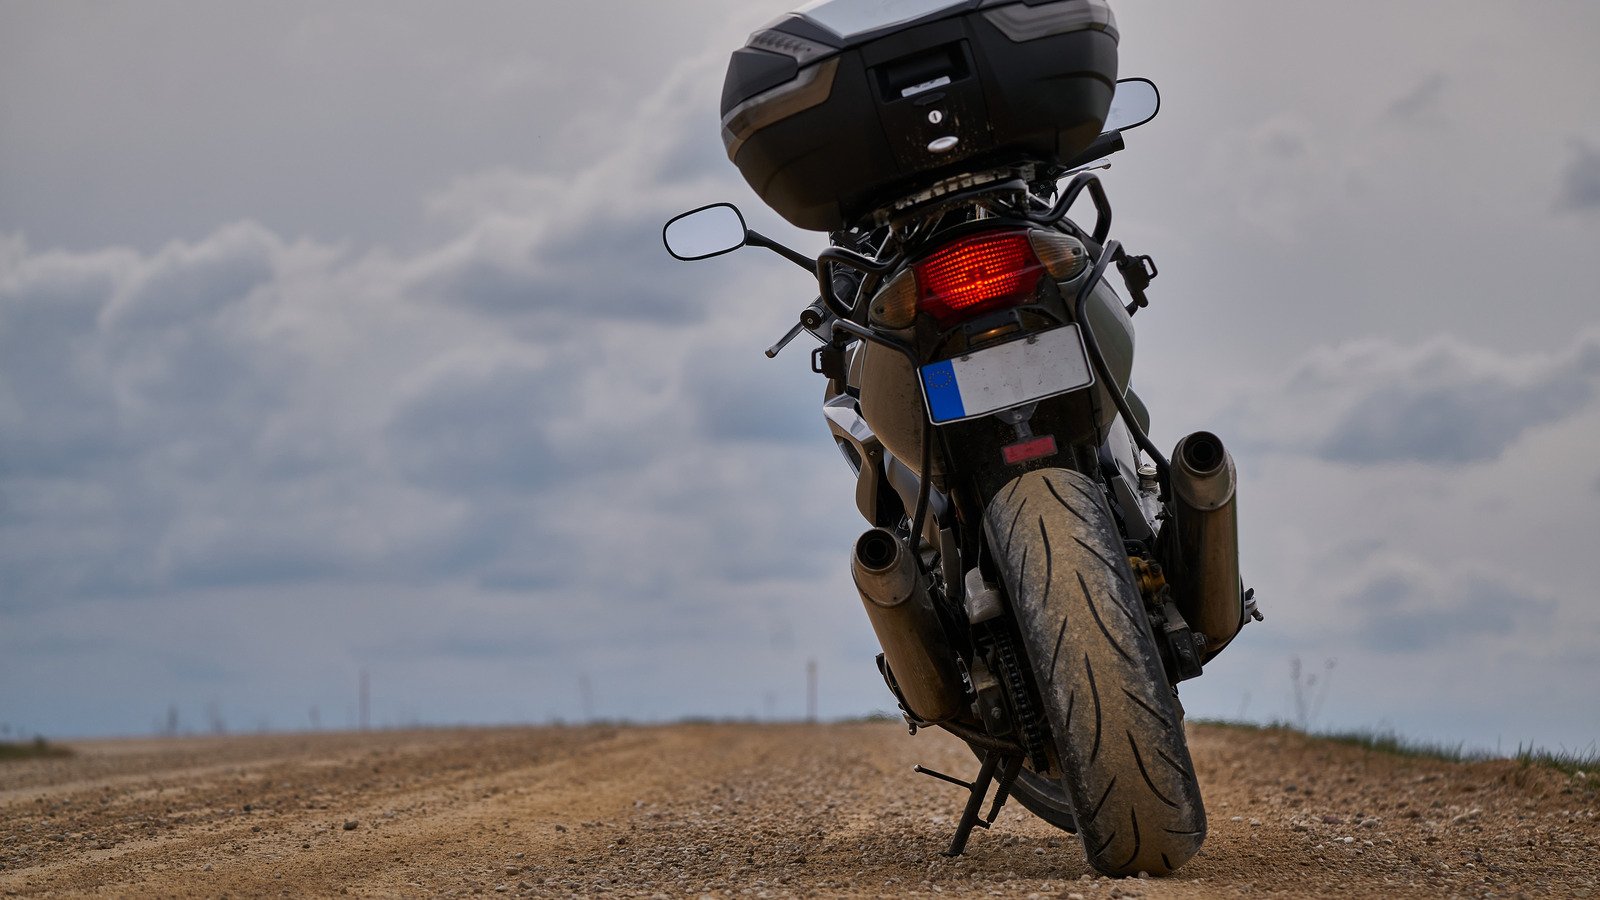 5 Of The Best Motorcycles For Long-Distance Riding